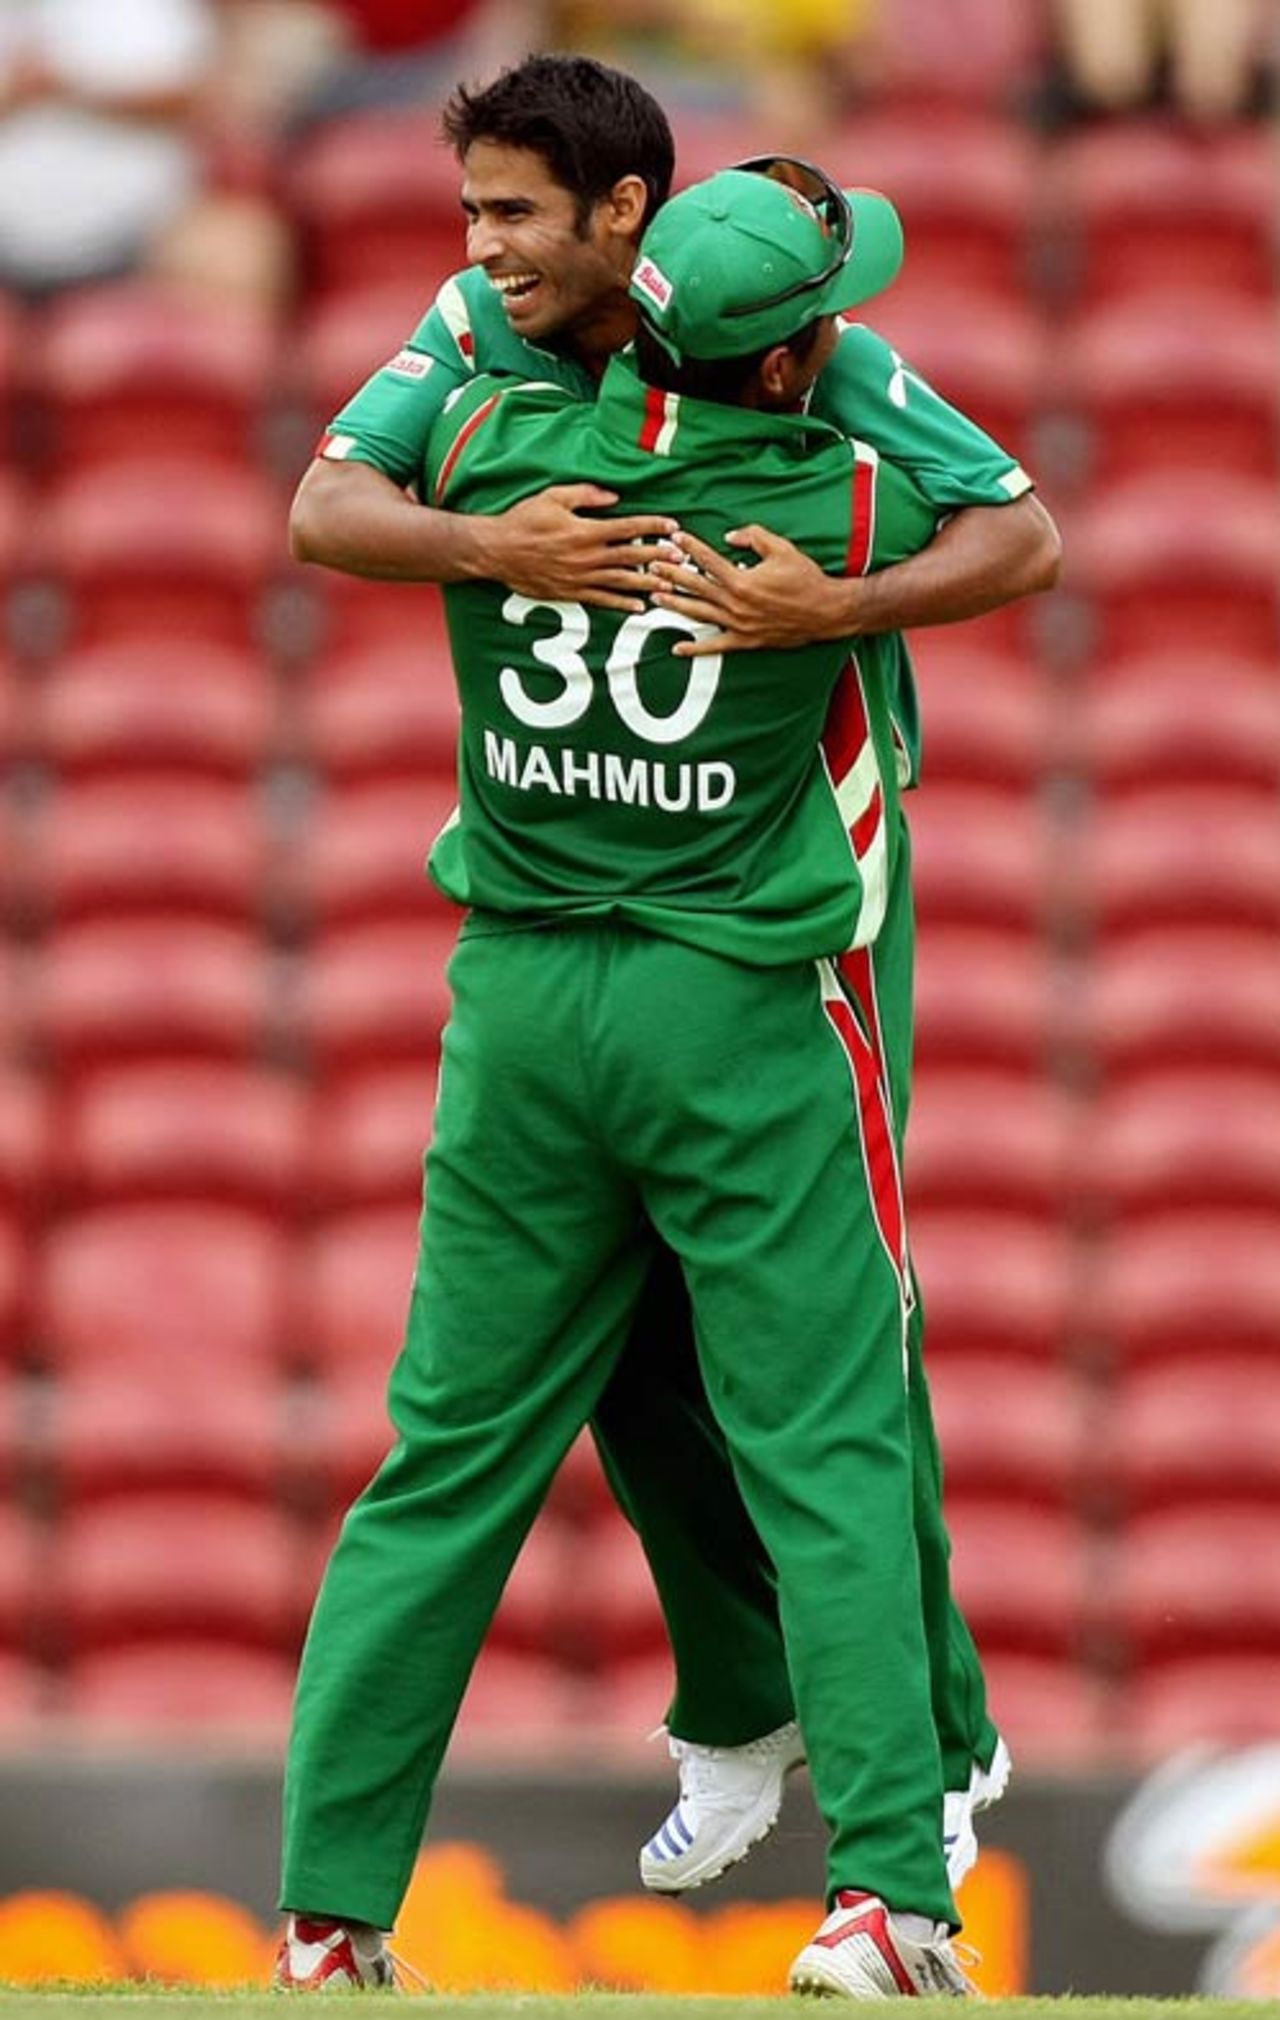 Farhad Reza is congatulated on picking up a wicket with his first ball, Australia v Bangladesh, 3rd ODI, Darwin, September 6, 2008